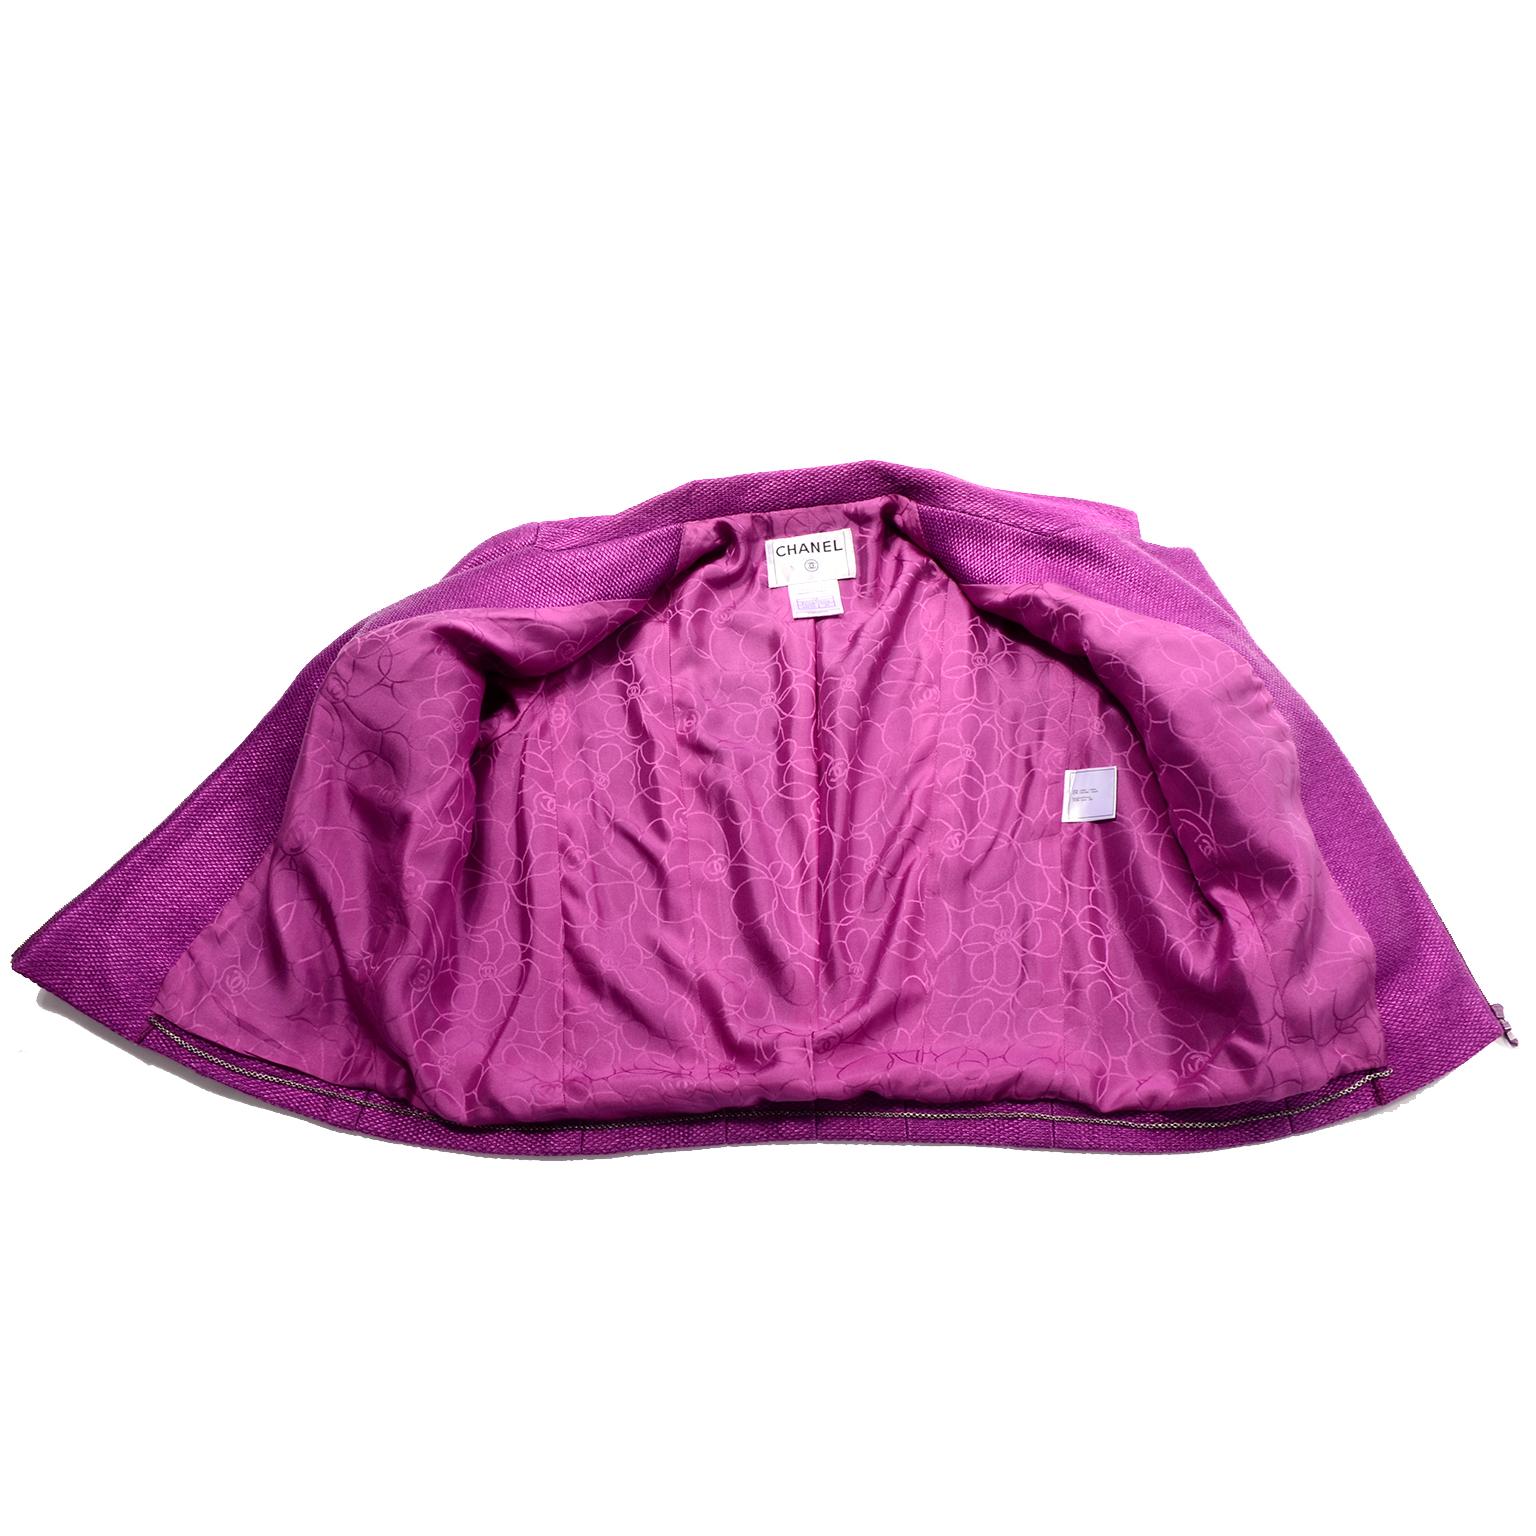 Chanel 2001 Magenta Purple Metallic Cropped Jacket w Asymmetrical Zipper In Excellent Condition For Sale In Portland, OR